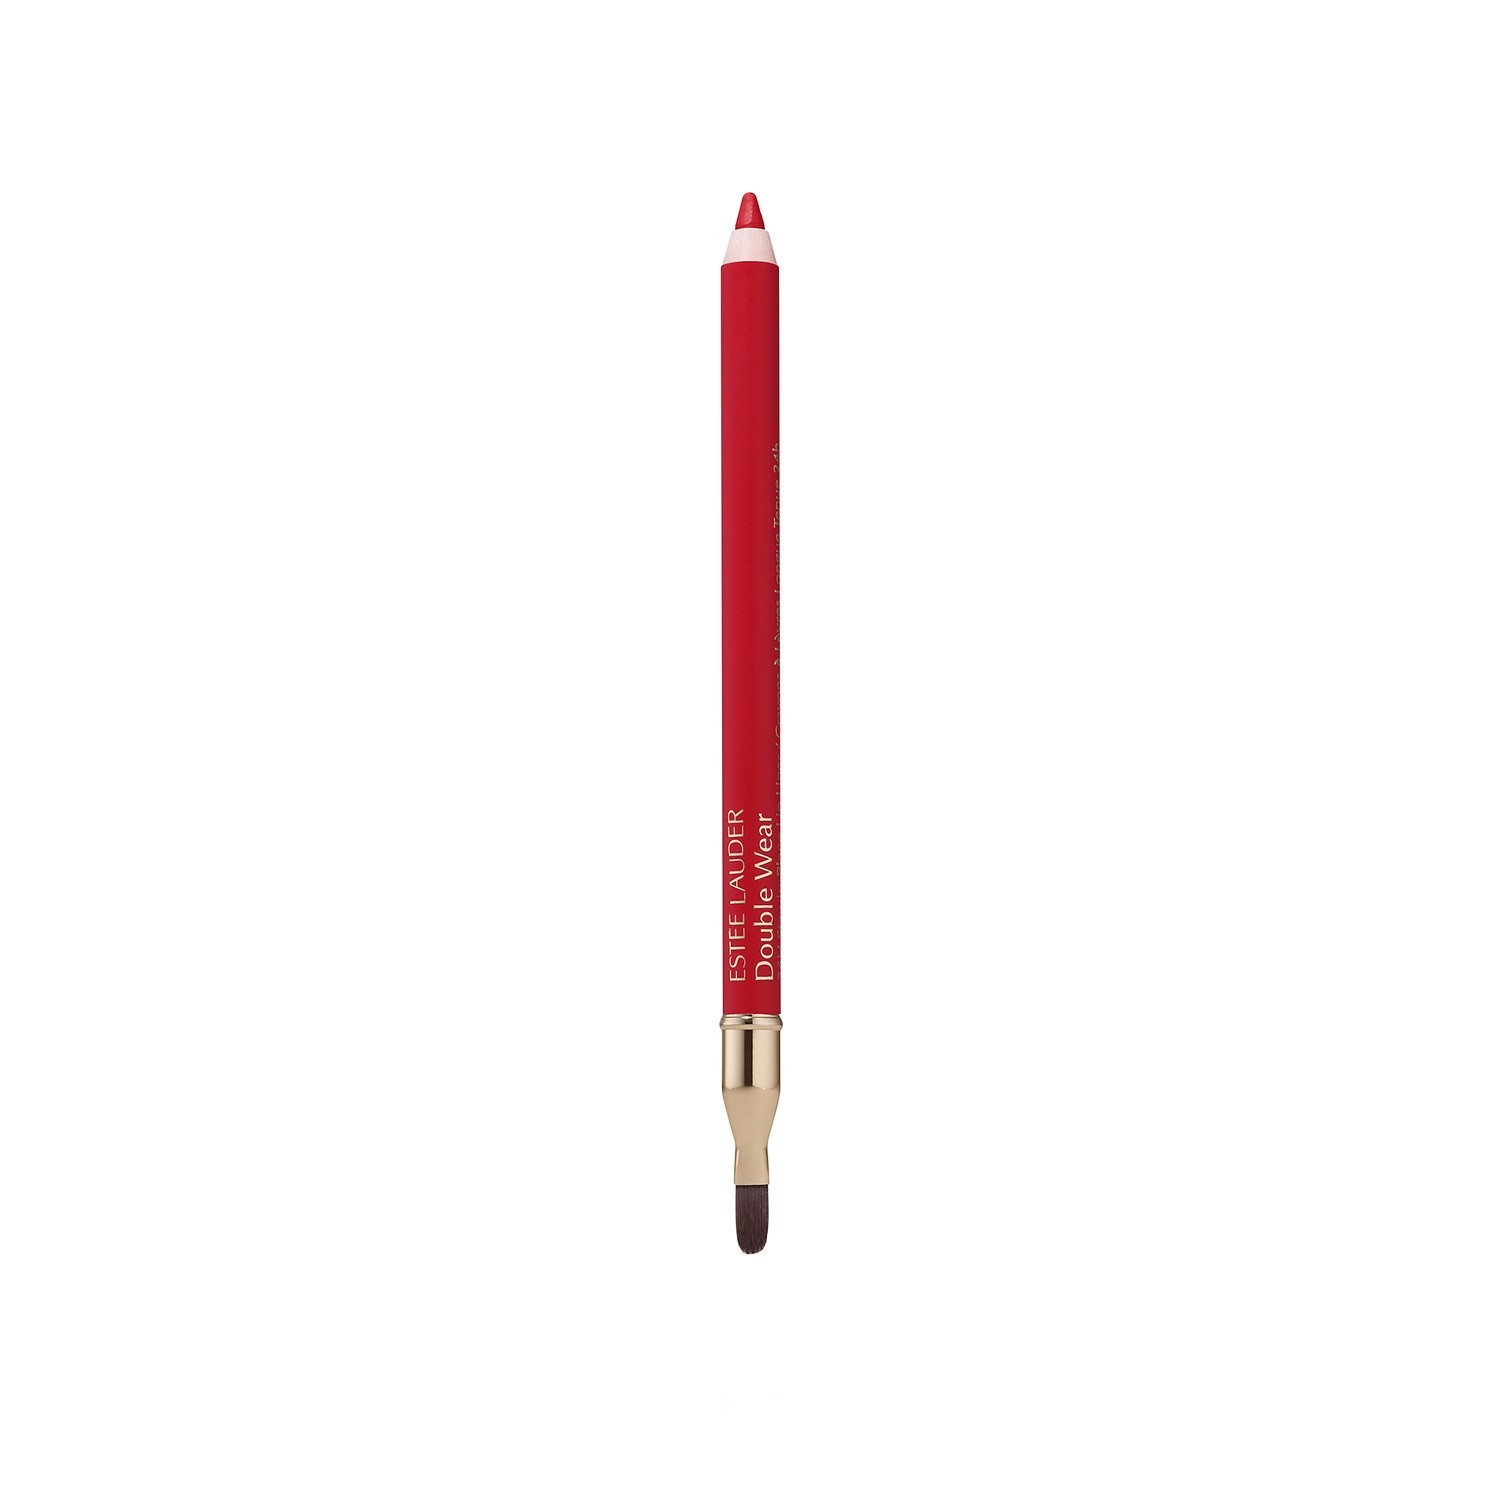 DOUBLE WEAR 24h stay-in-place lip liner - 018 Red, Red, large image number 0